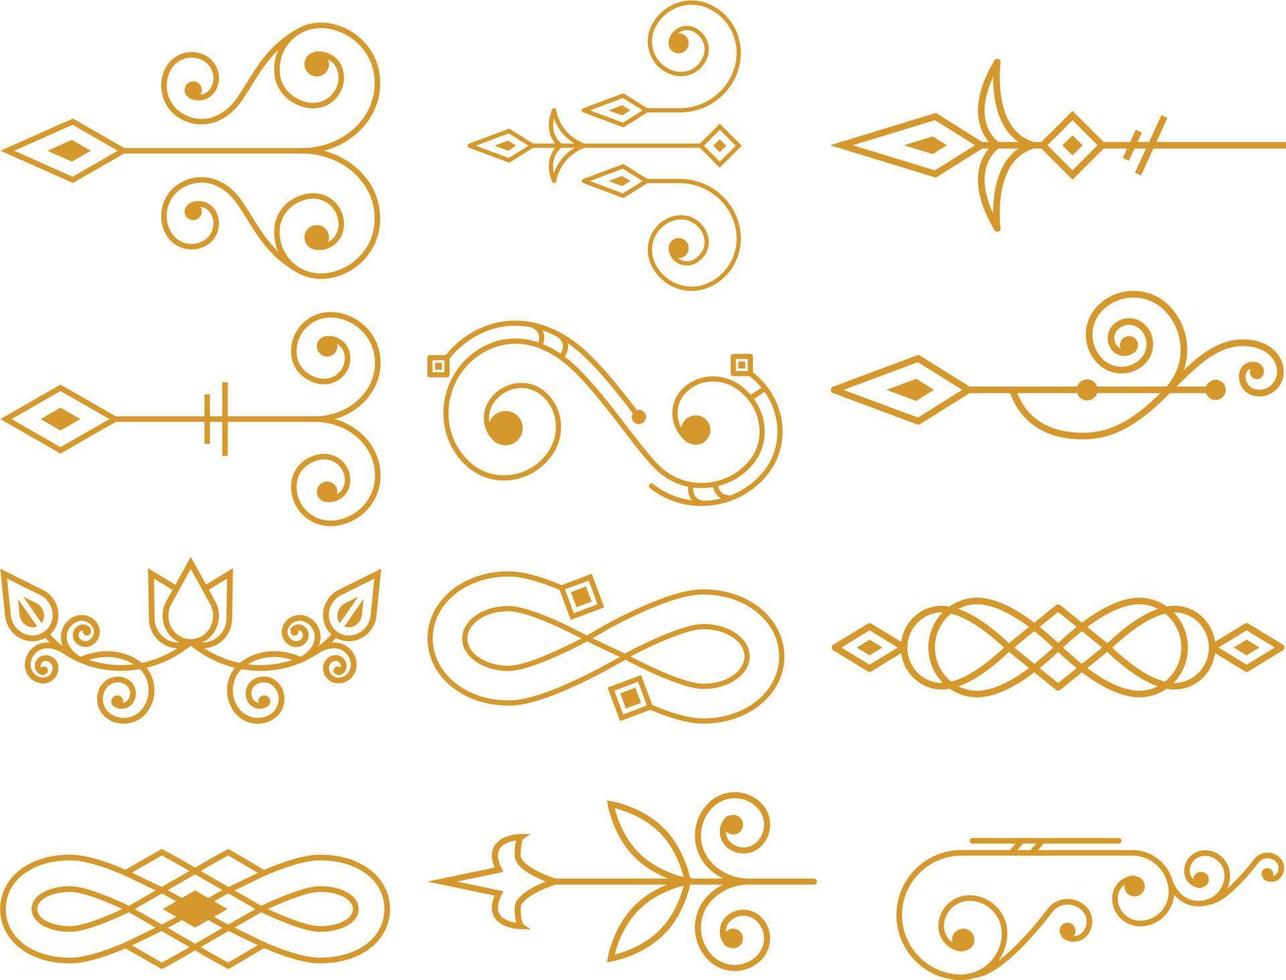 Vector set of calligraphic design elements. Can be used for invitation, congratulation or website layout.